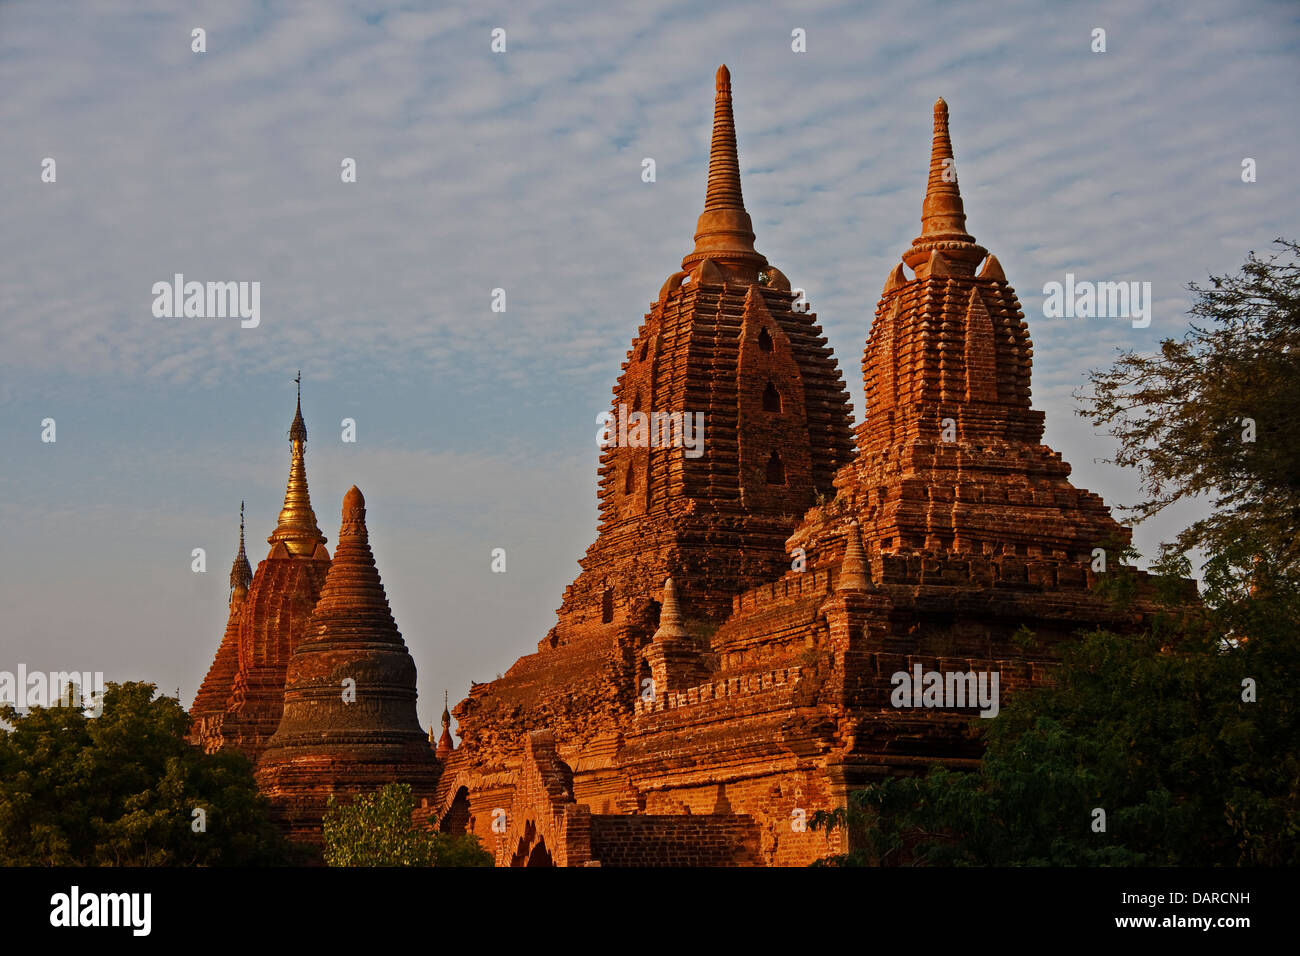 Old Bagan pagoda and temple architecture. Stock Photo